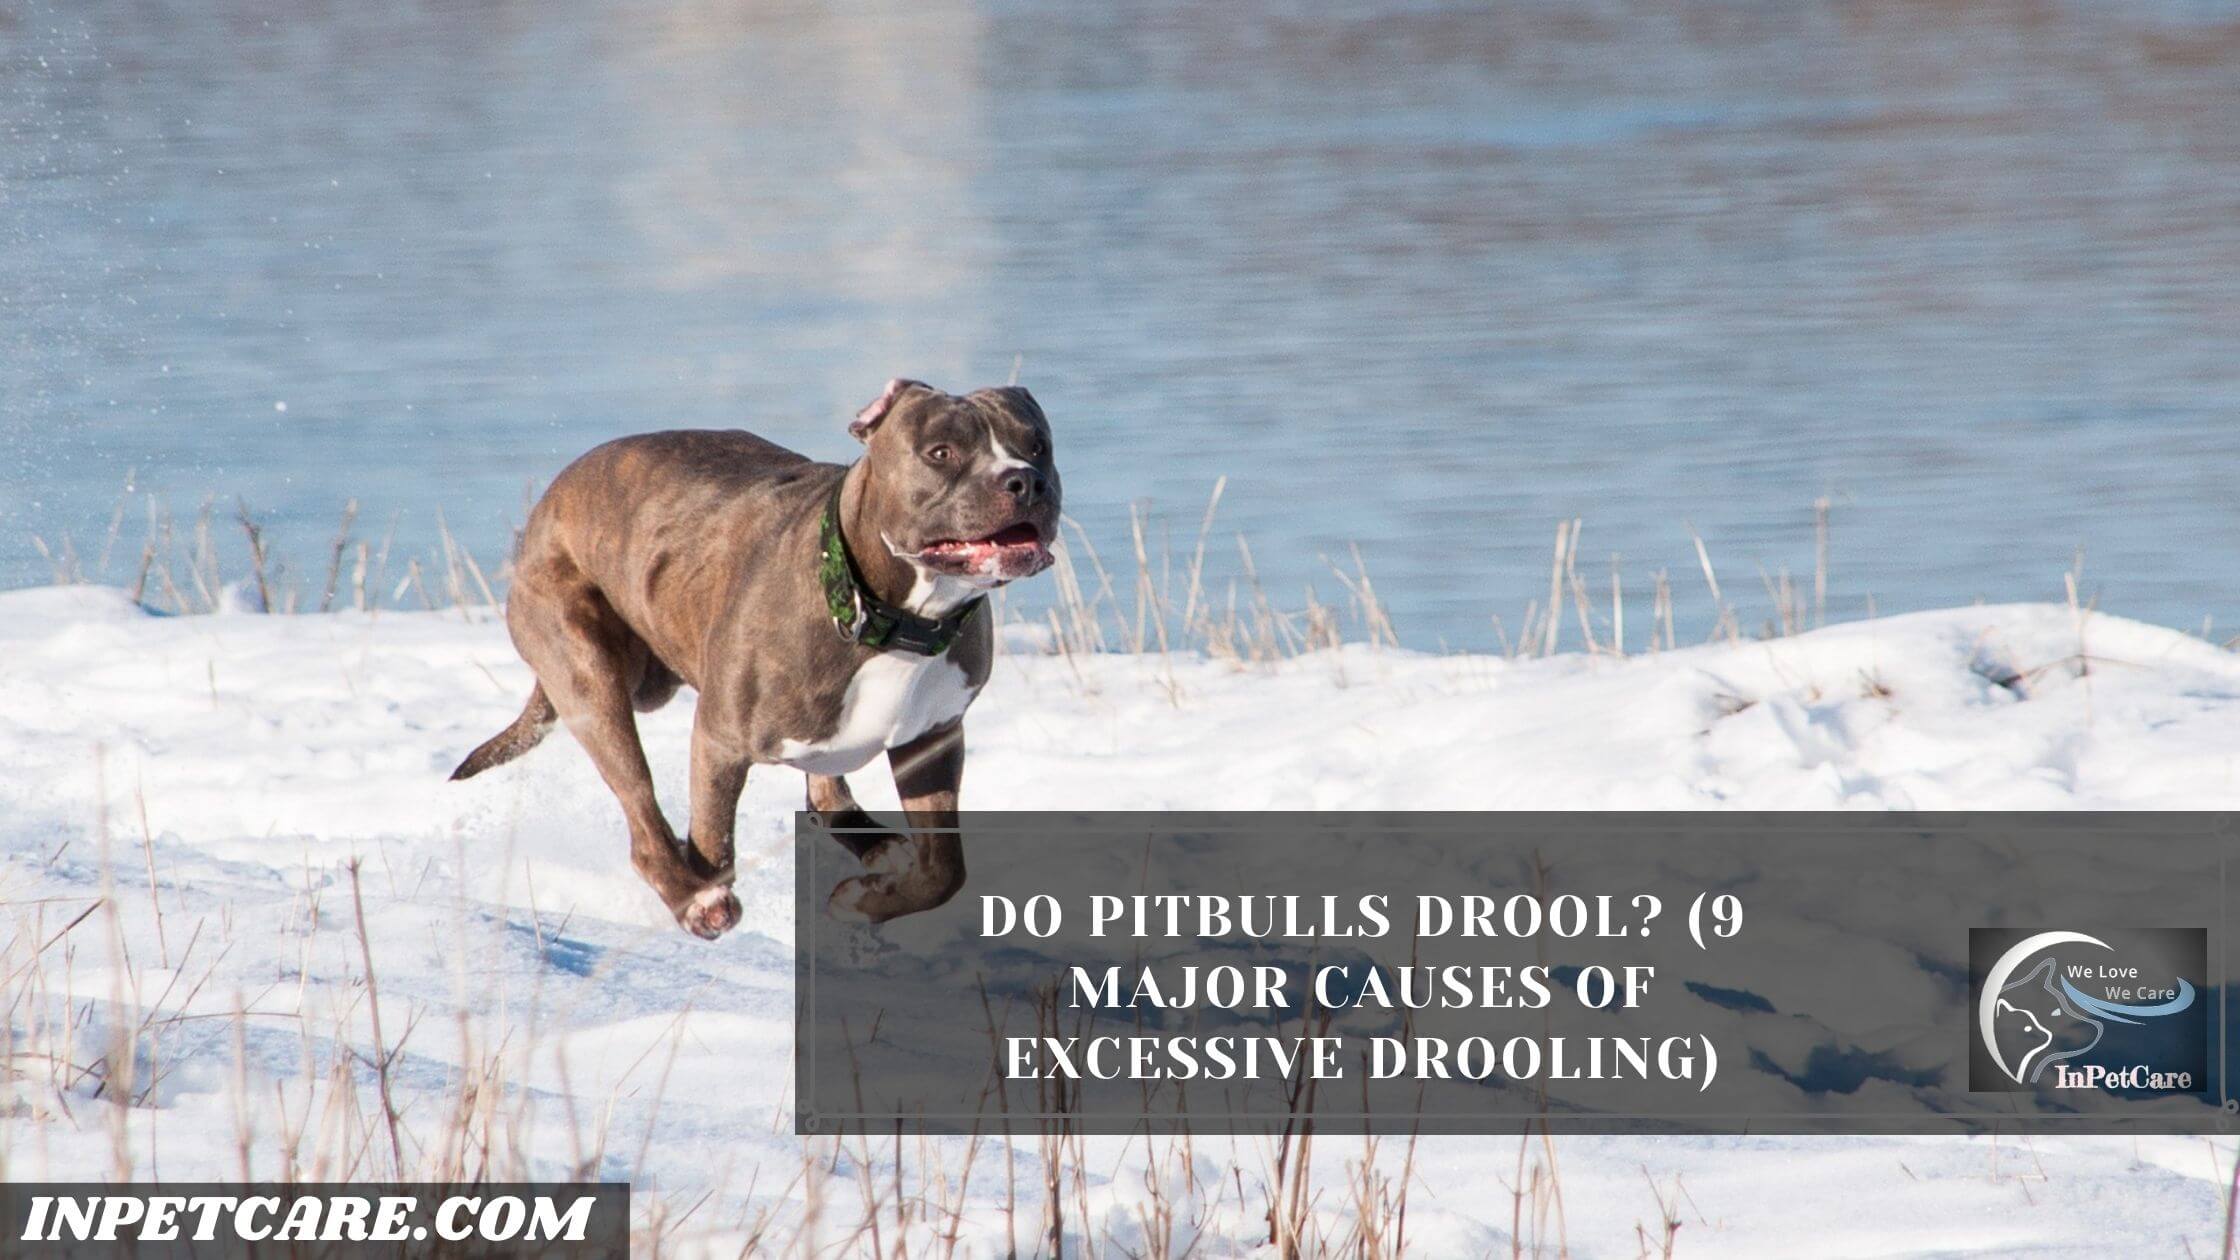 Do Pitbulls Drool? (9 Major Causes of Excessive Drooling)